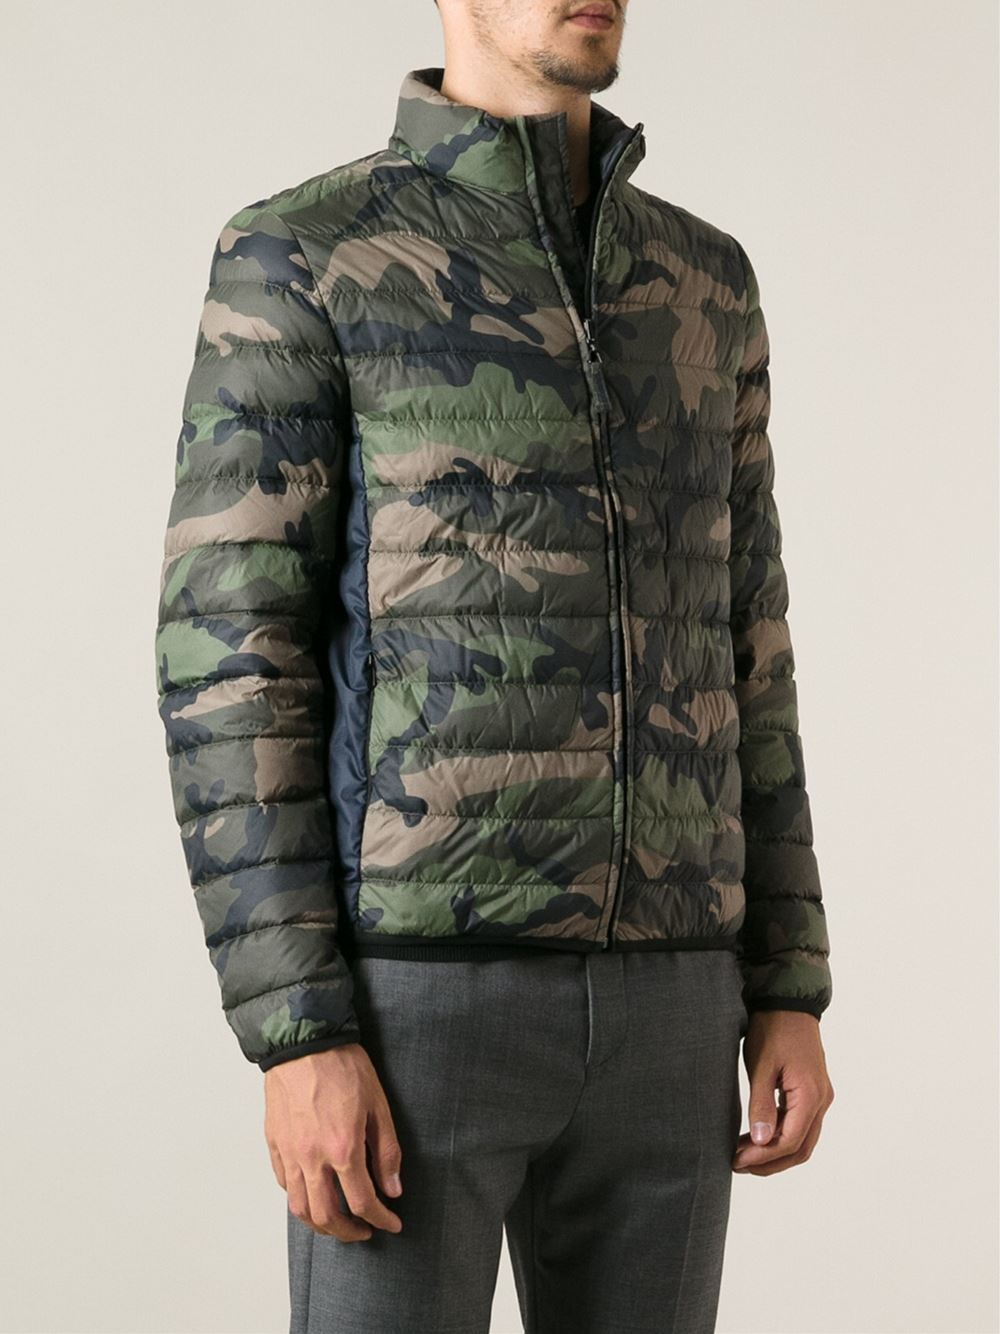 Valentino Padded Camouflage Print Jacket in Green for Men - Lyst